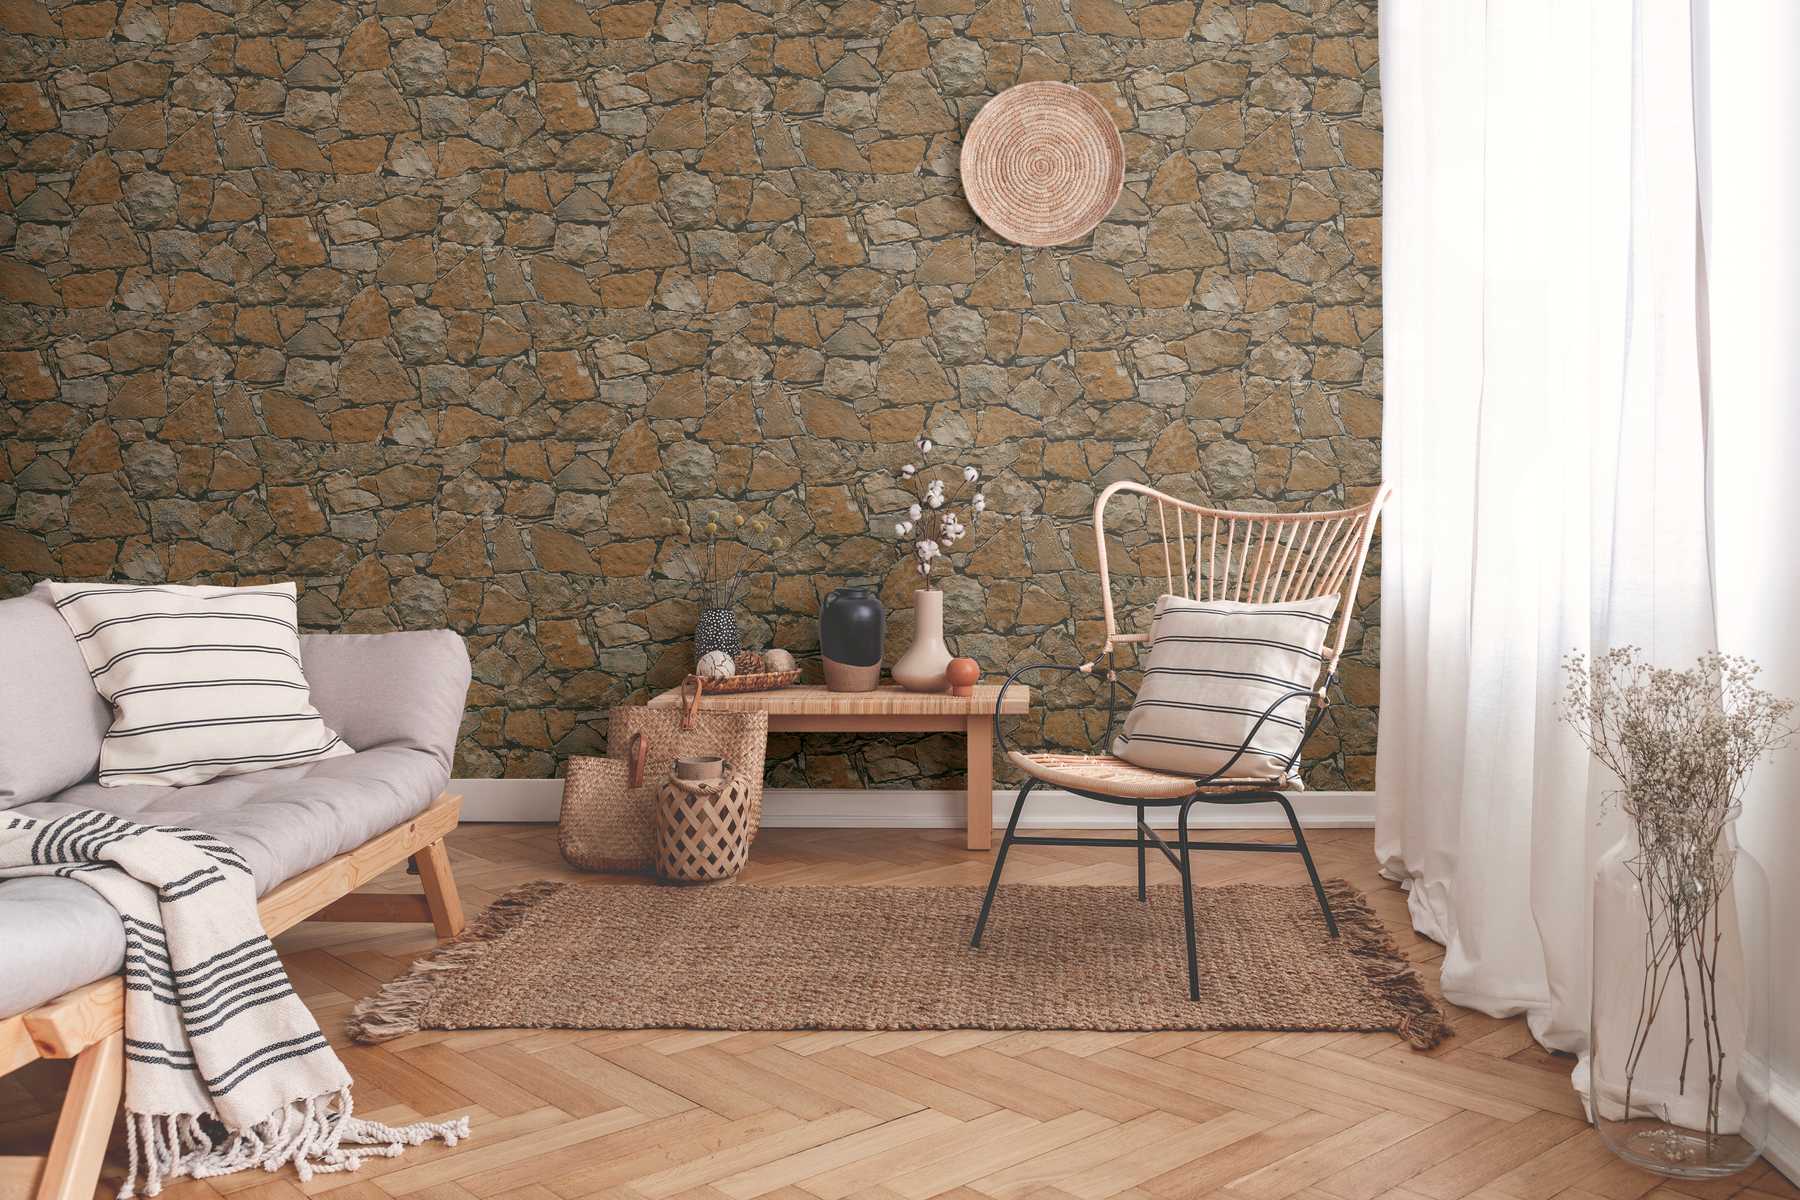             Nature stone wallpaper with realistic wall look - brown, beige, black
        